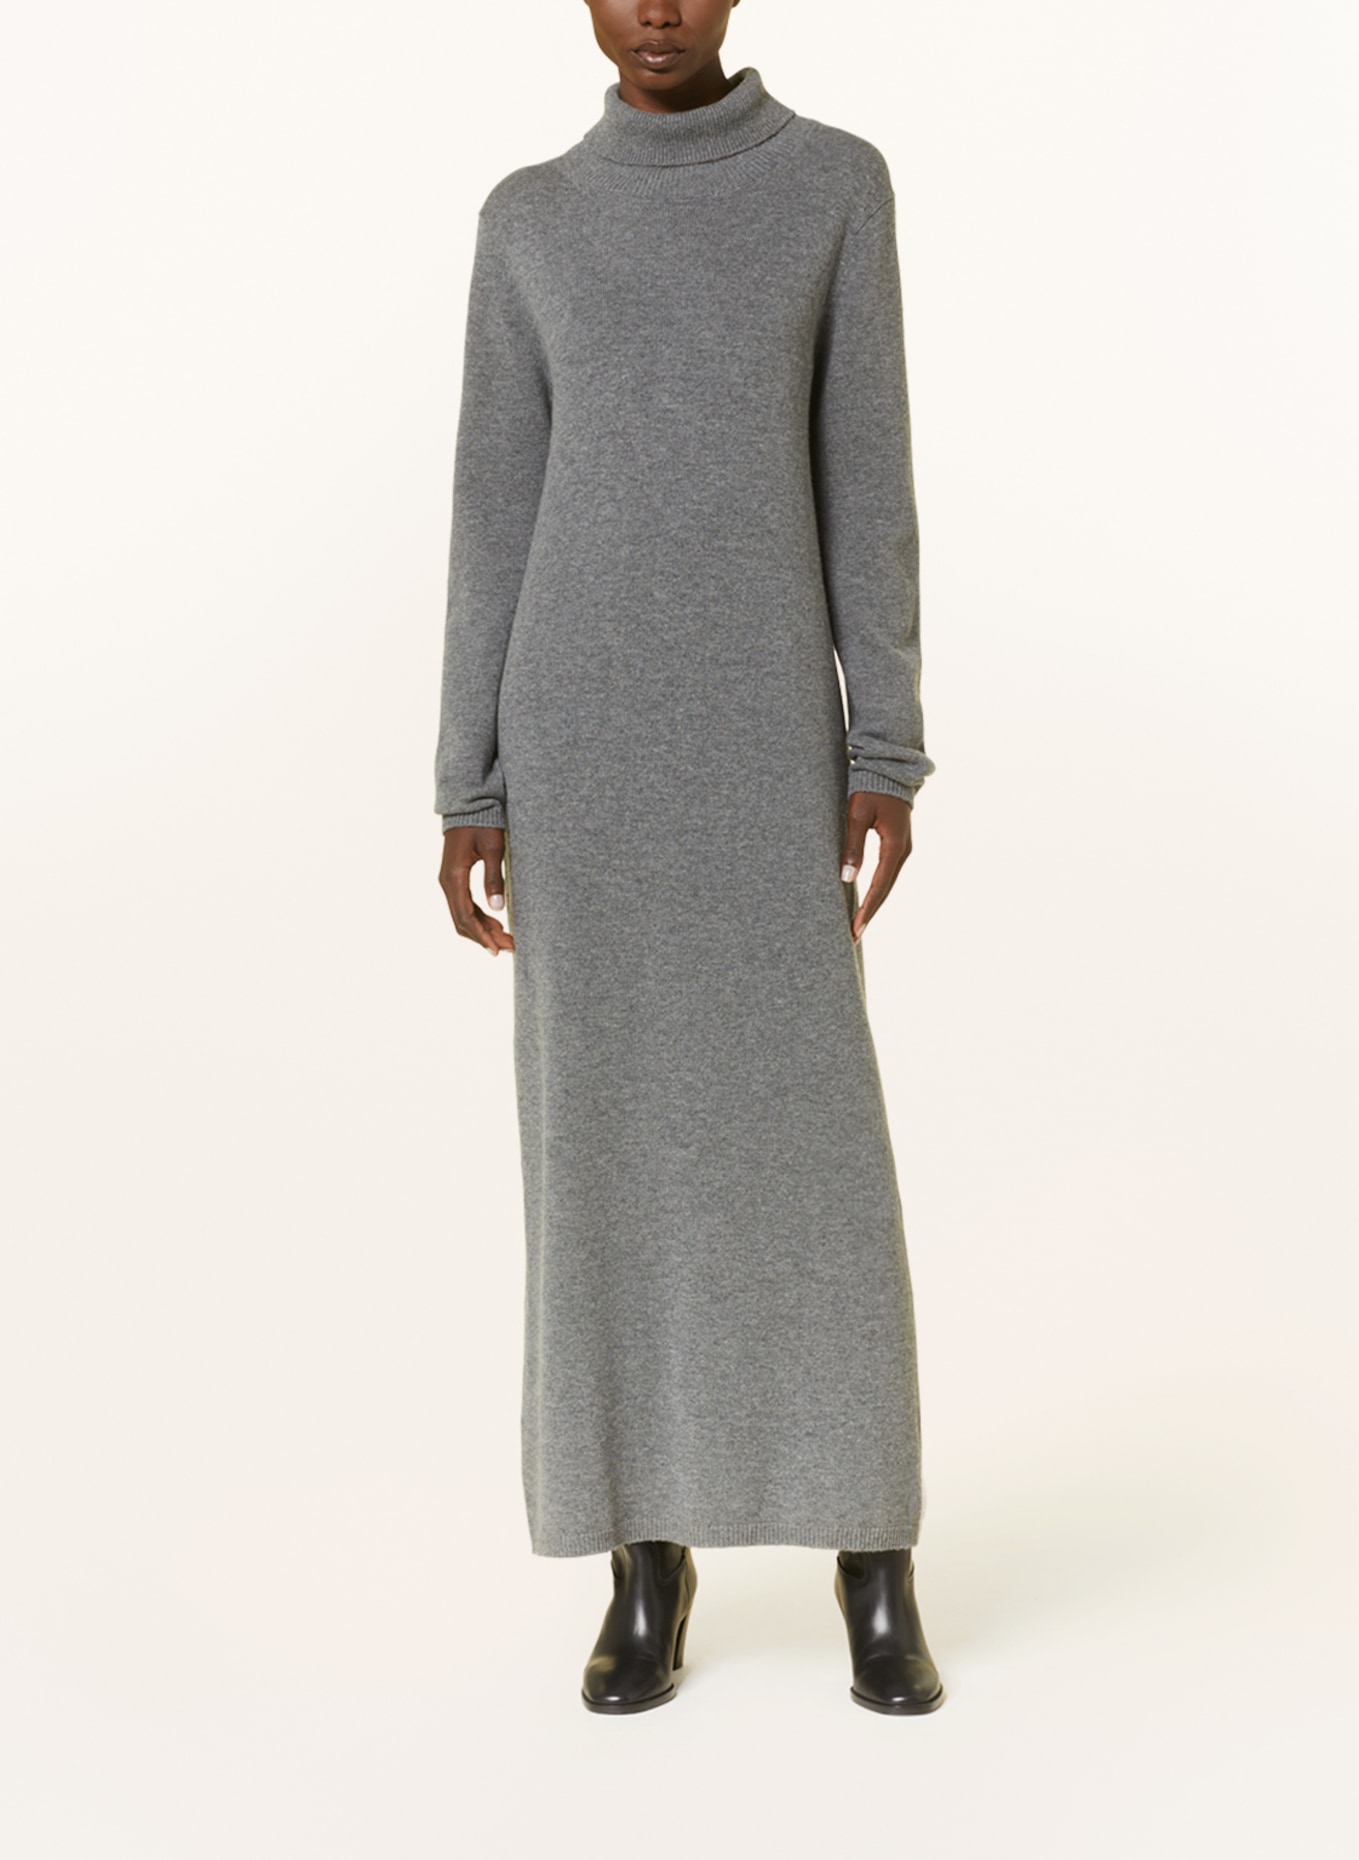 CLOSED Knit dress, Color: GRAY (Image 2)